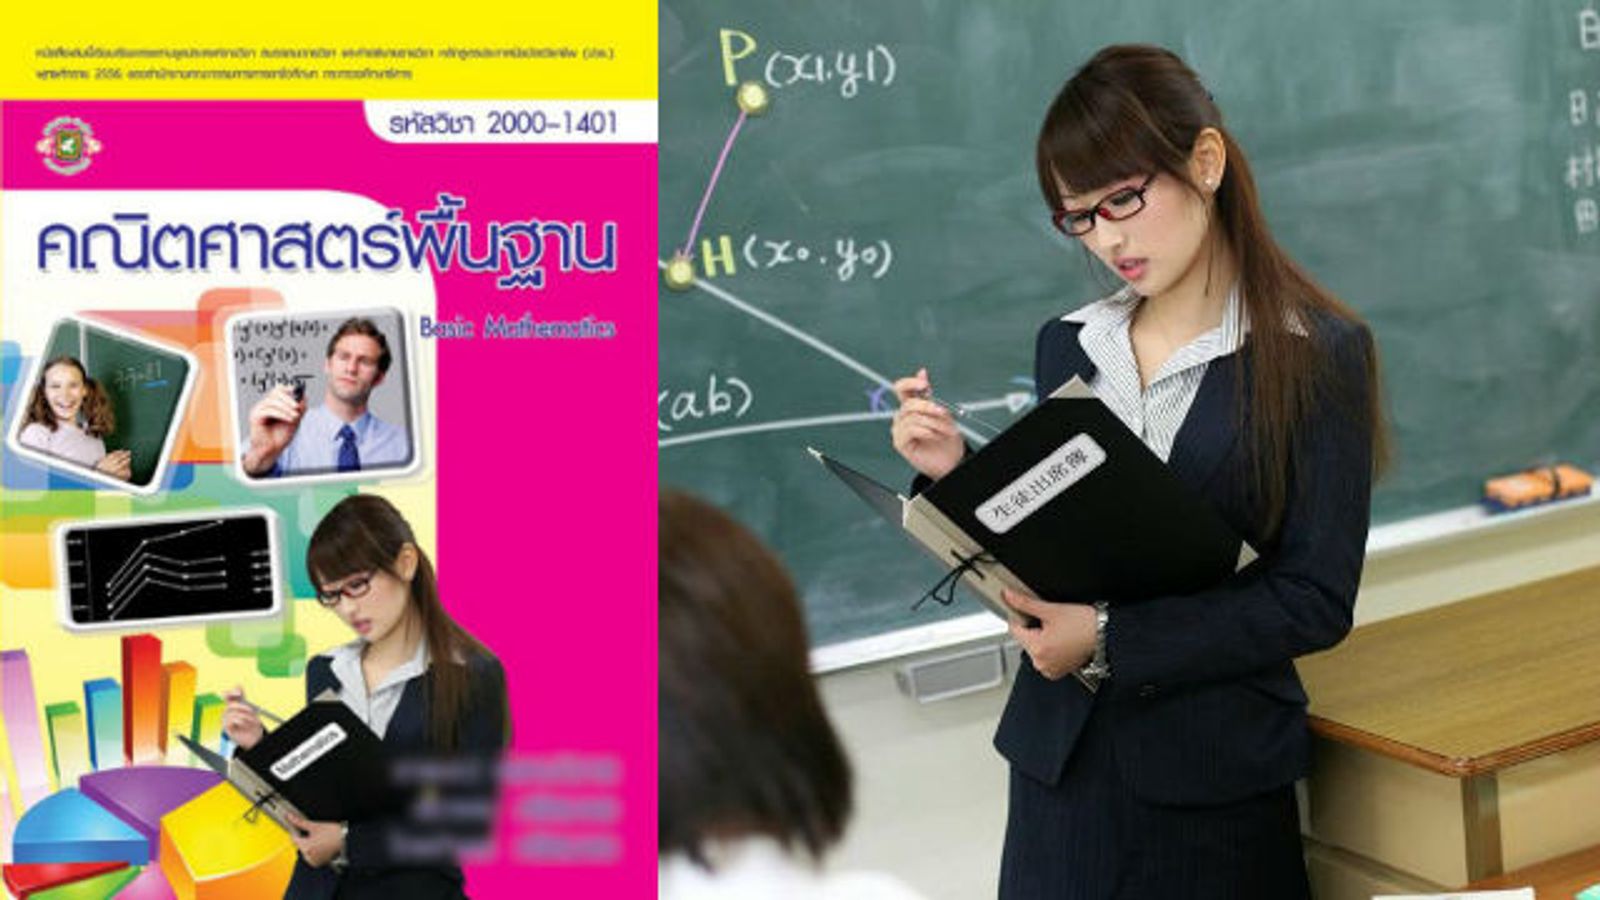 Japanese Porn Star Makes Cover of Math Textbooks in Thailand